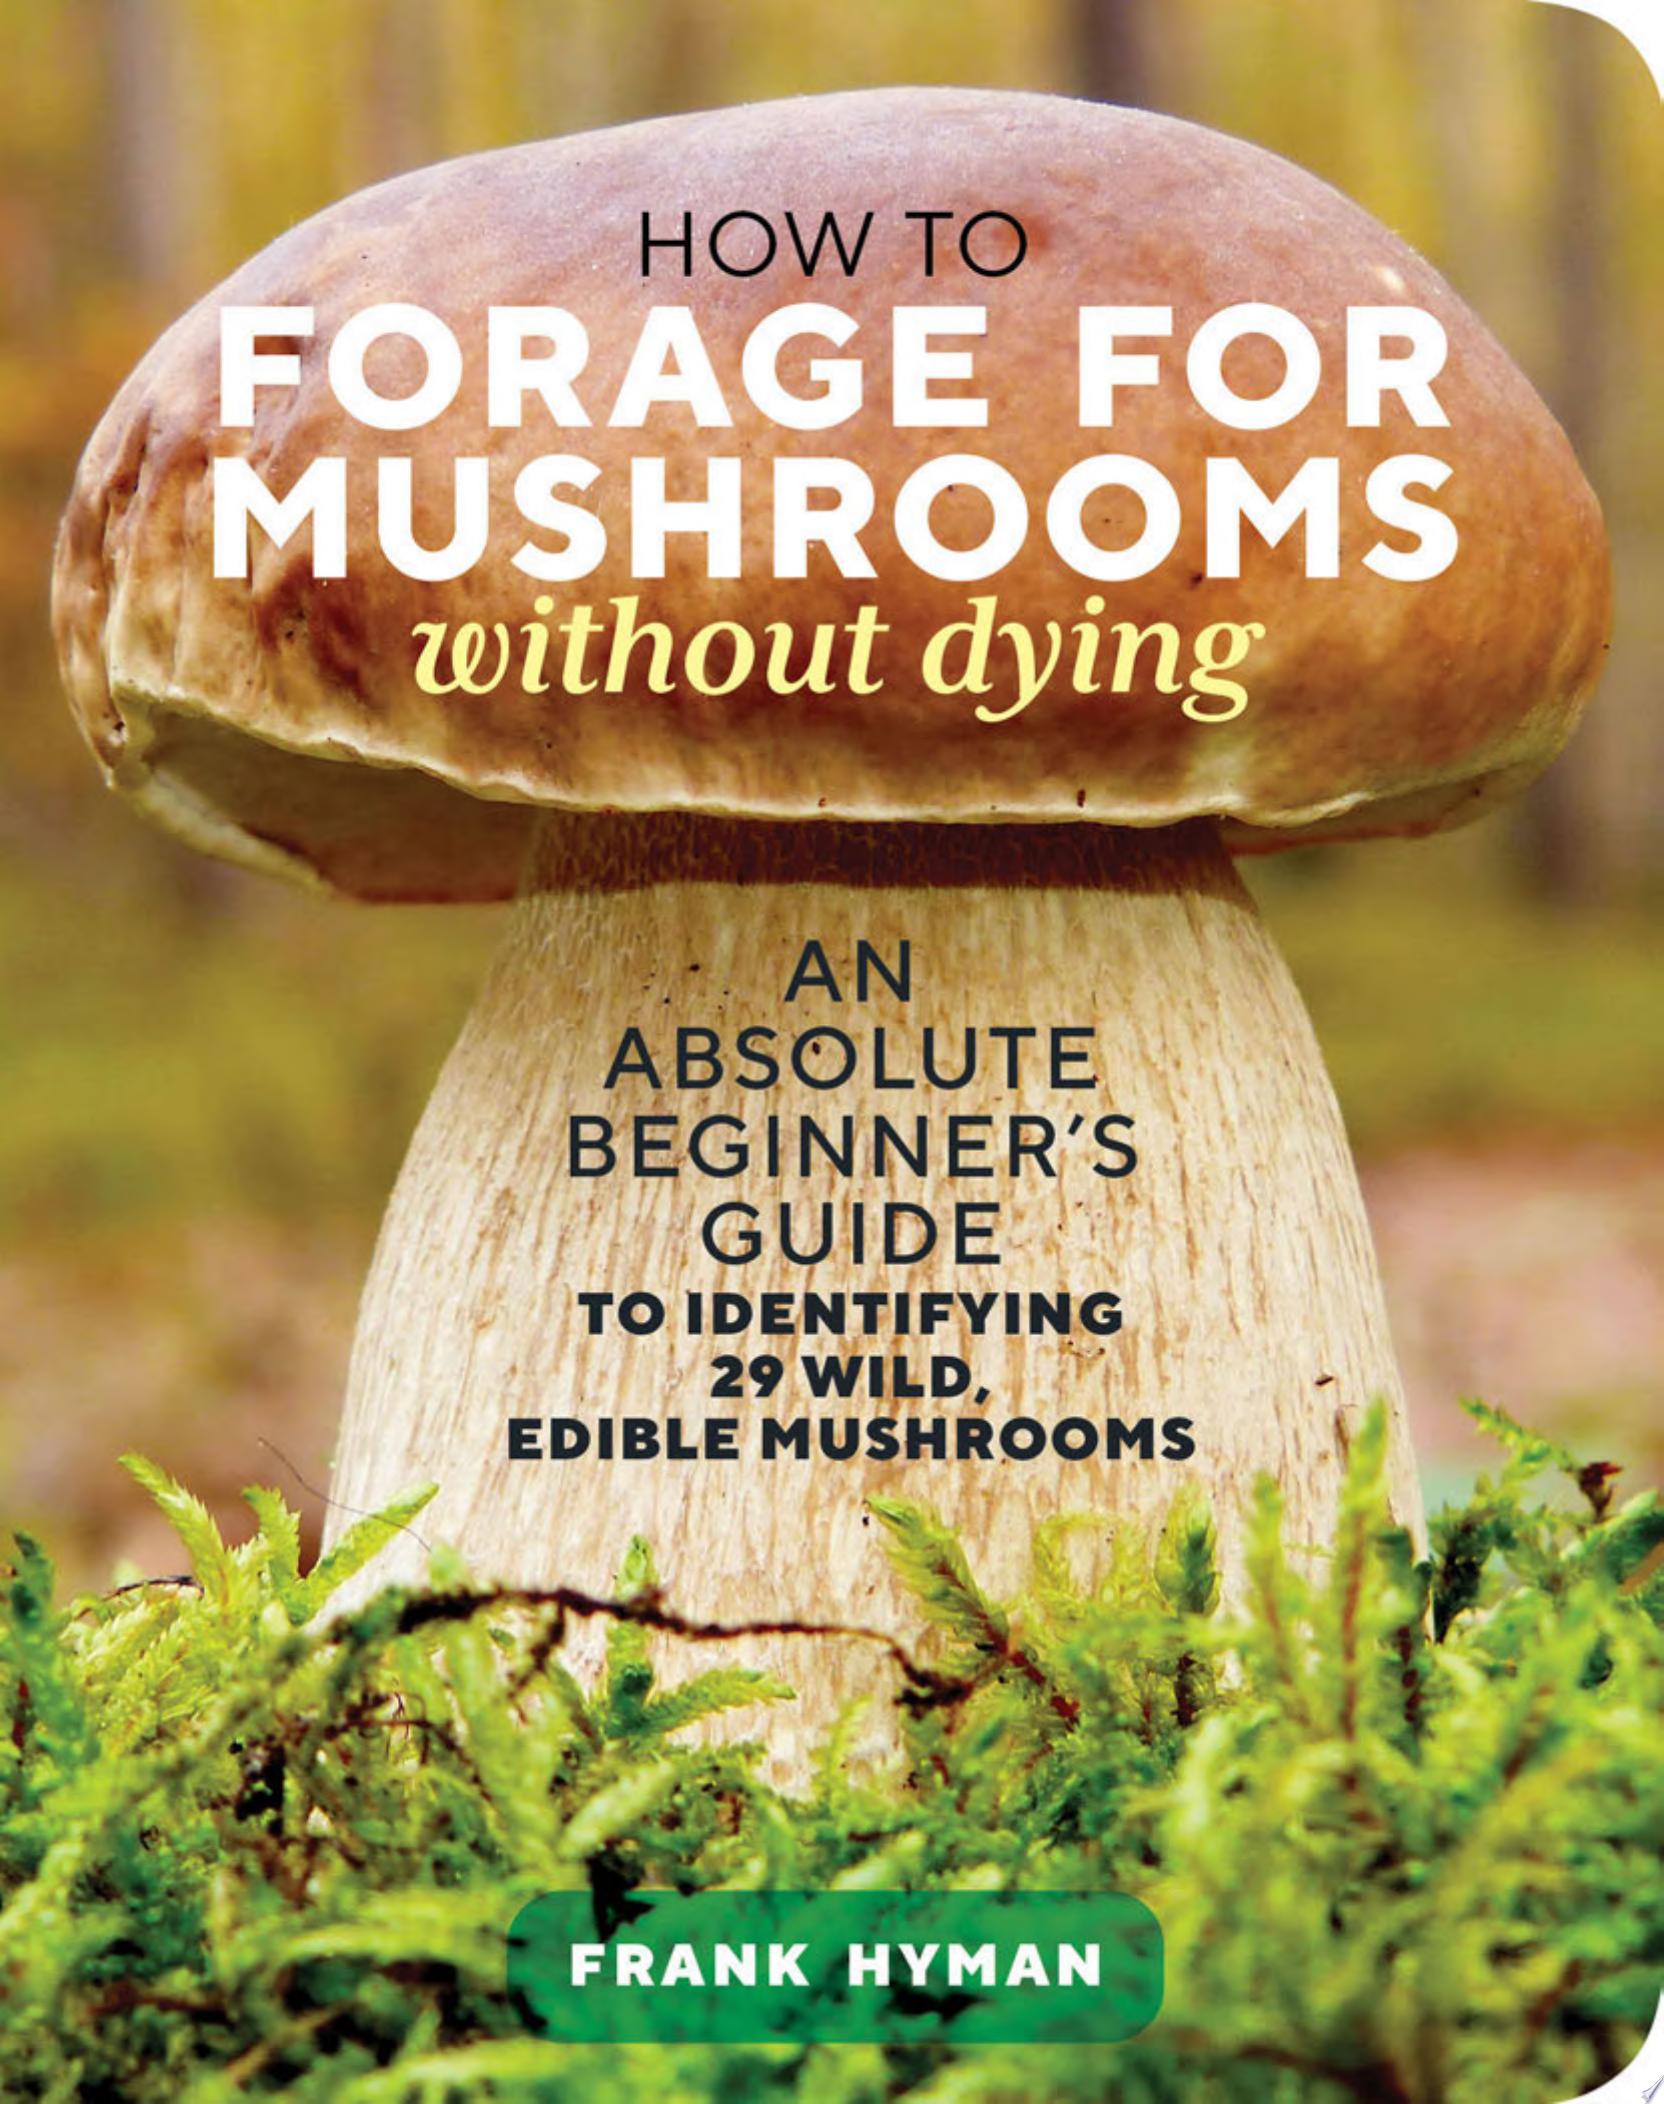 Image for "How to Forage for Mushrooms Without Dying"